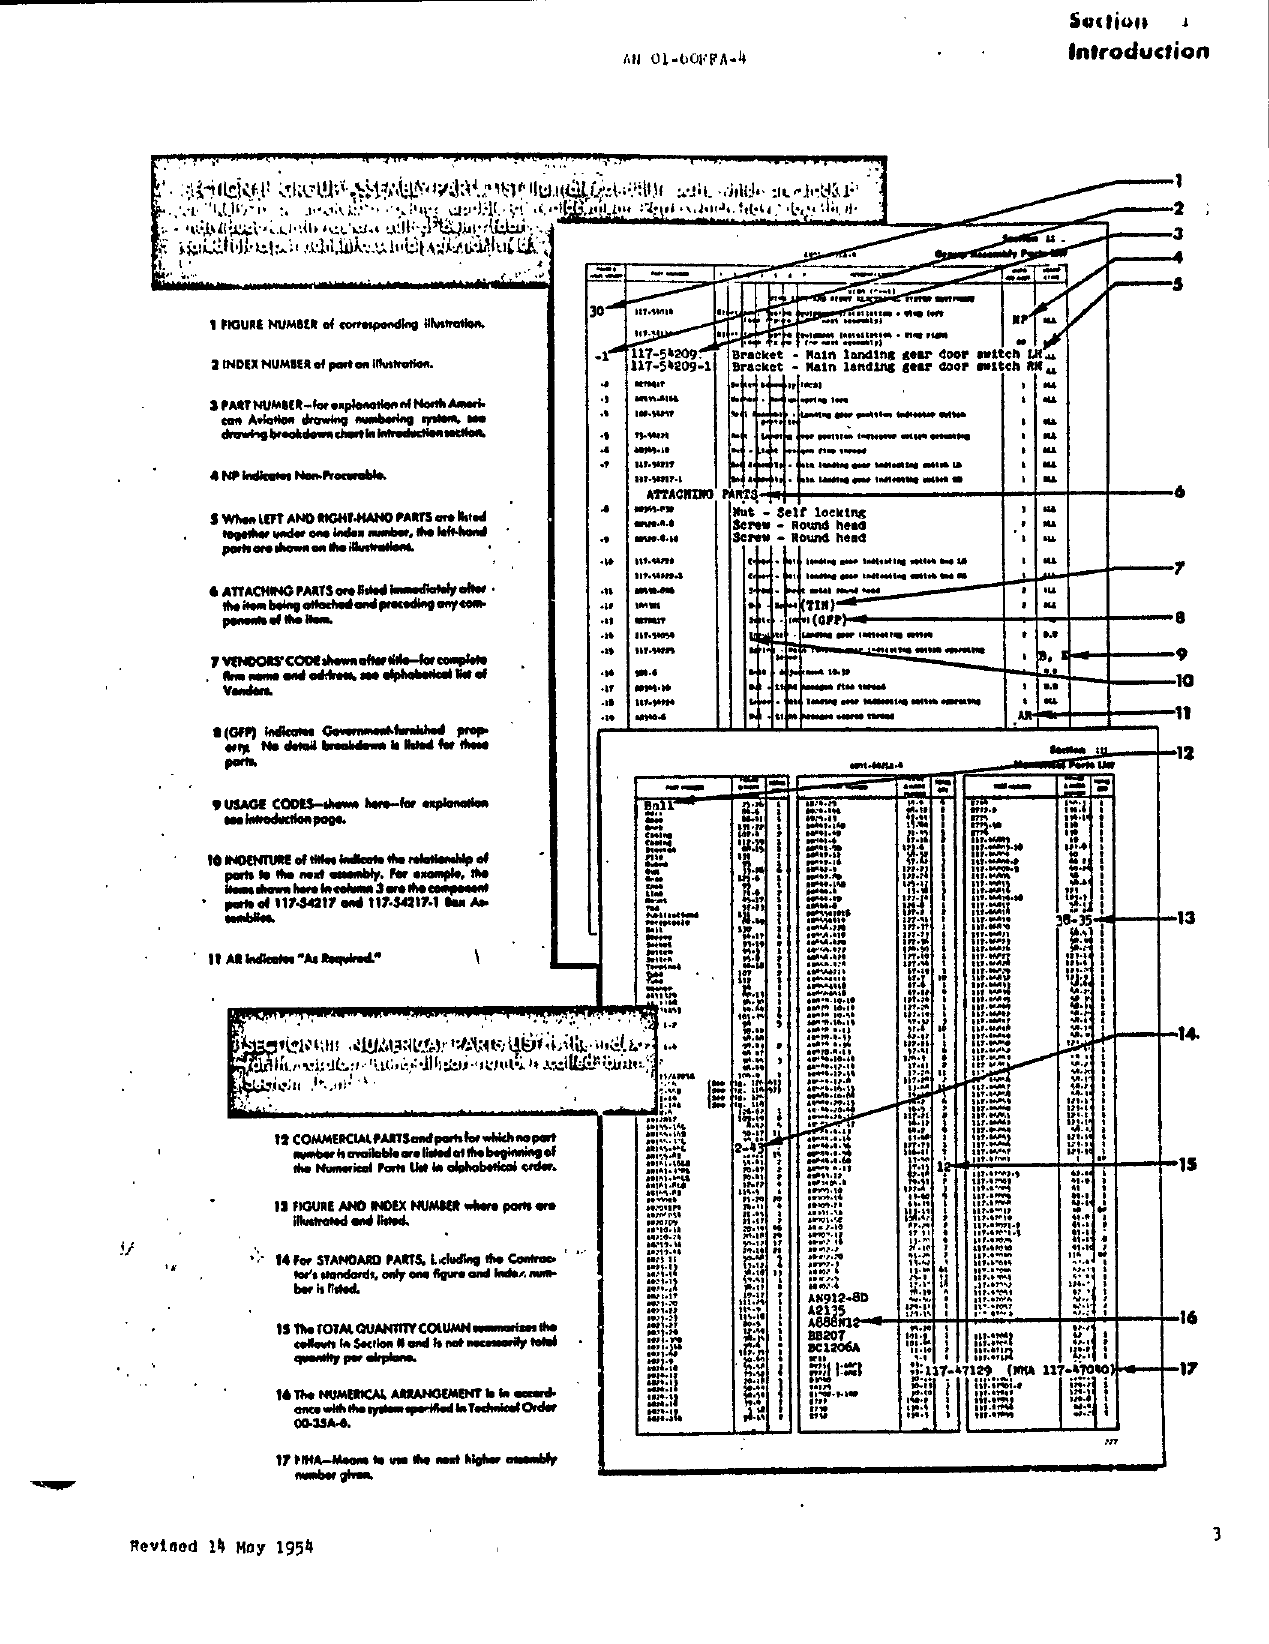 Sample page 8 from AirCorps Library document: Parts Catalog for T-6G and LT-6G